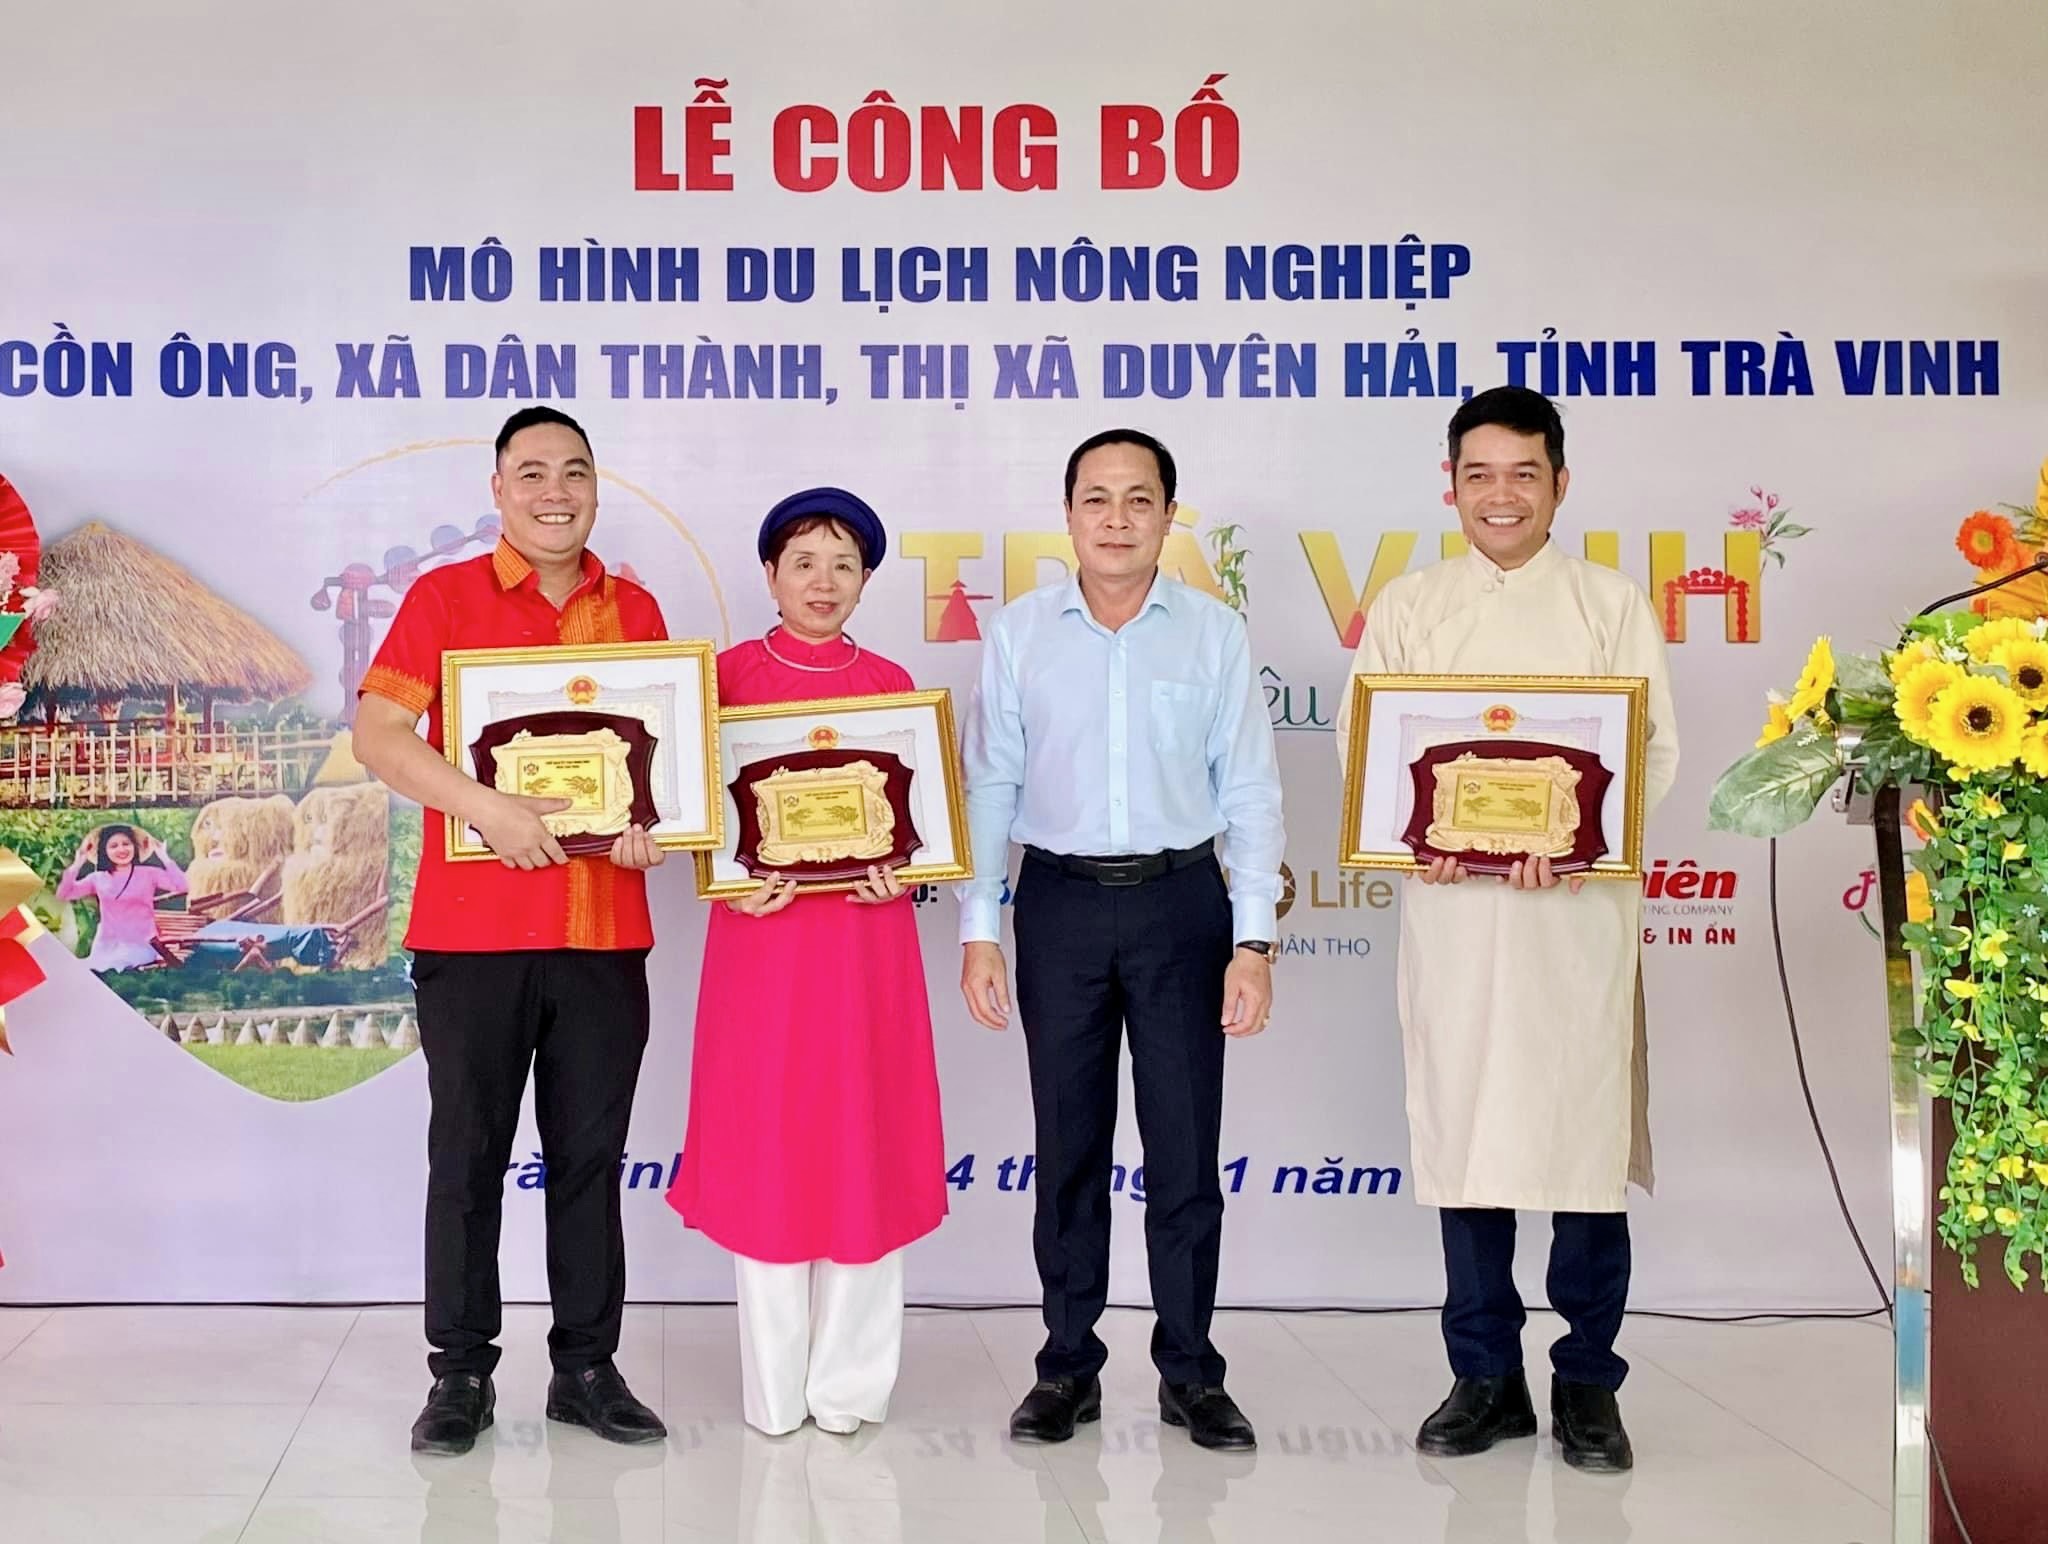 doc dao mo hinh du lich canh nong nuong theo dieu ly dat giong o tra vinh - 5